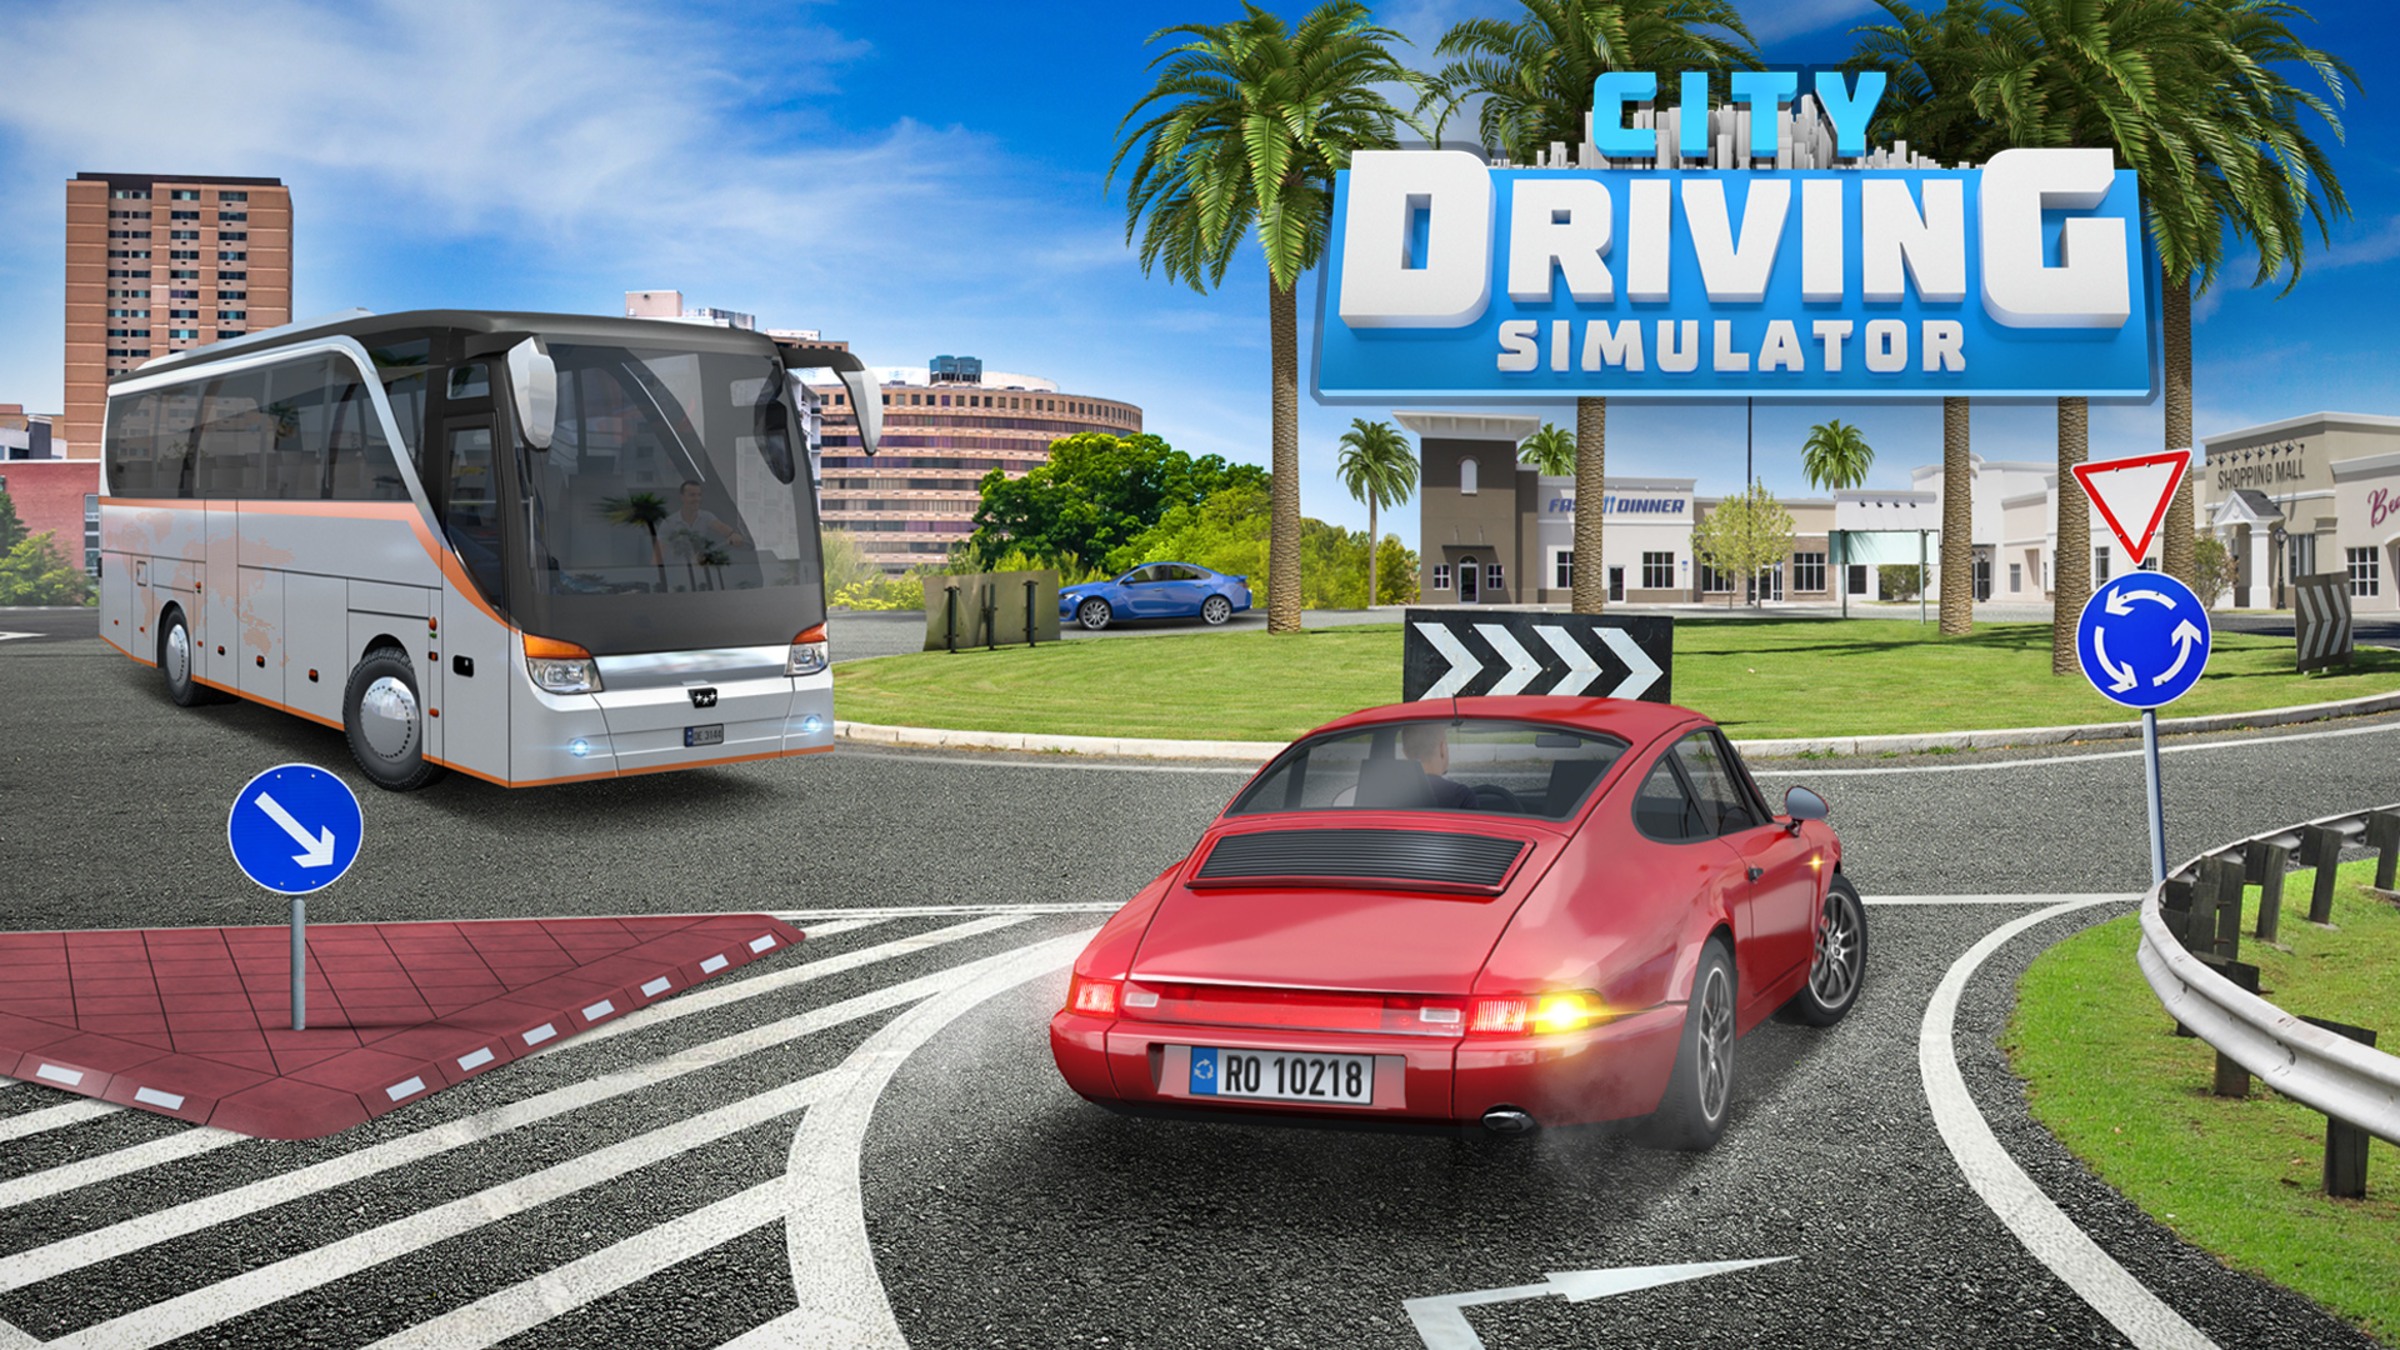 City Driving Simulator for Nintendo Switch - Official